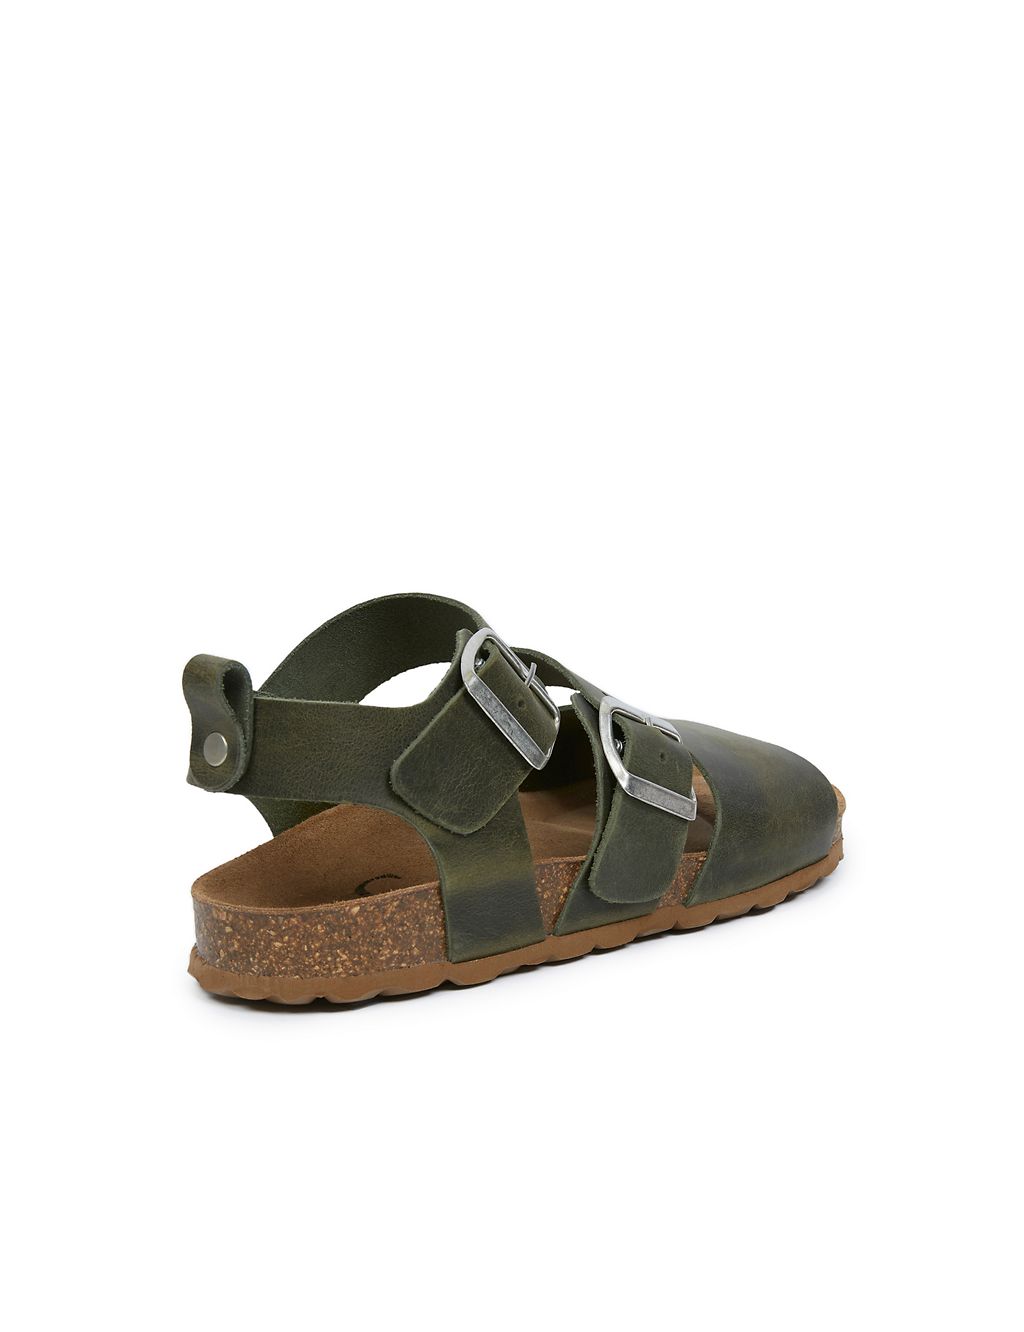 Leather Buckle Ankle Strap Flat Sandals 7 of 7